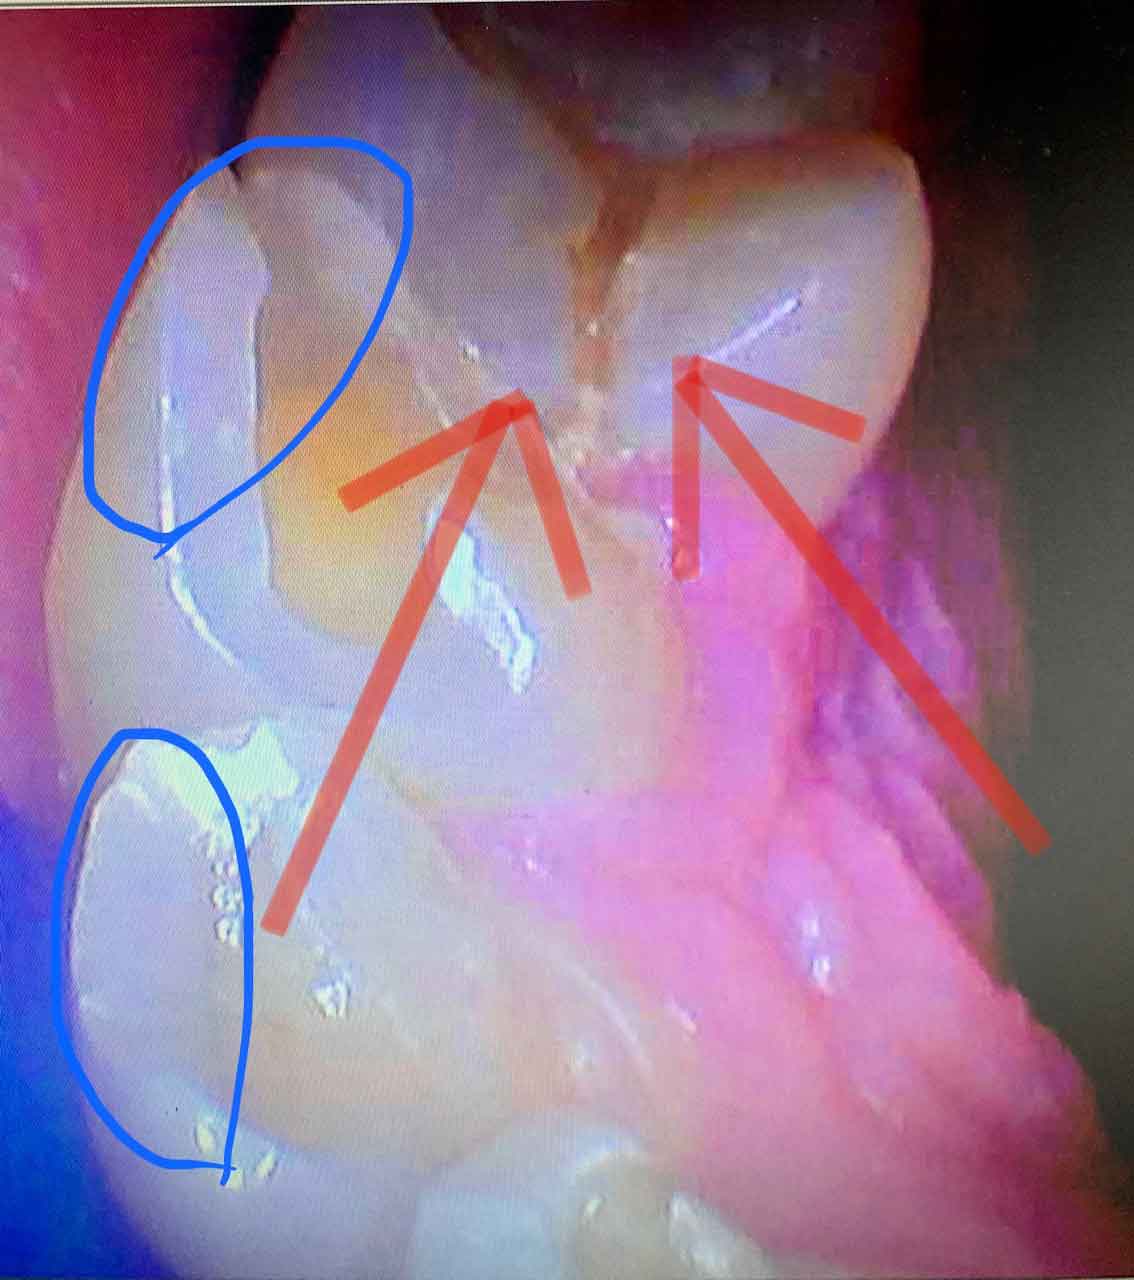 damaged tooth without the help of a night guard